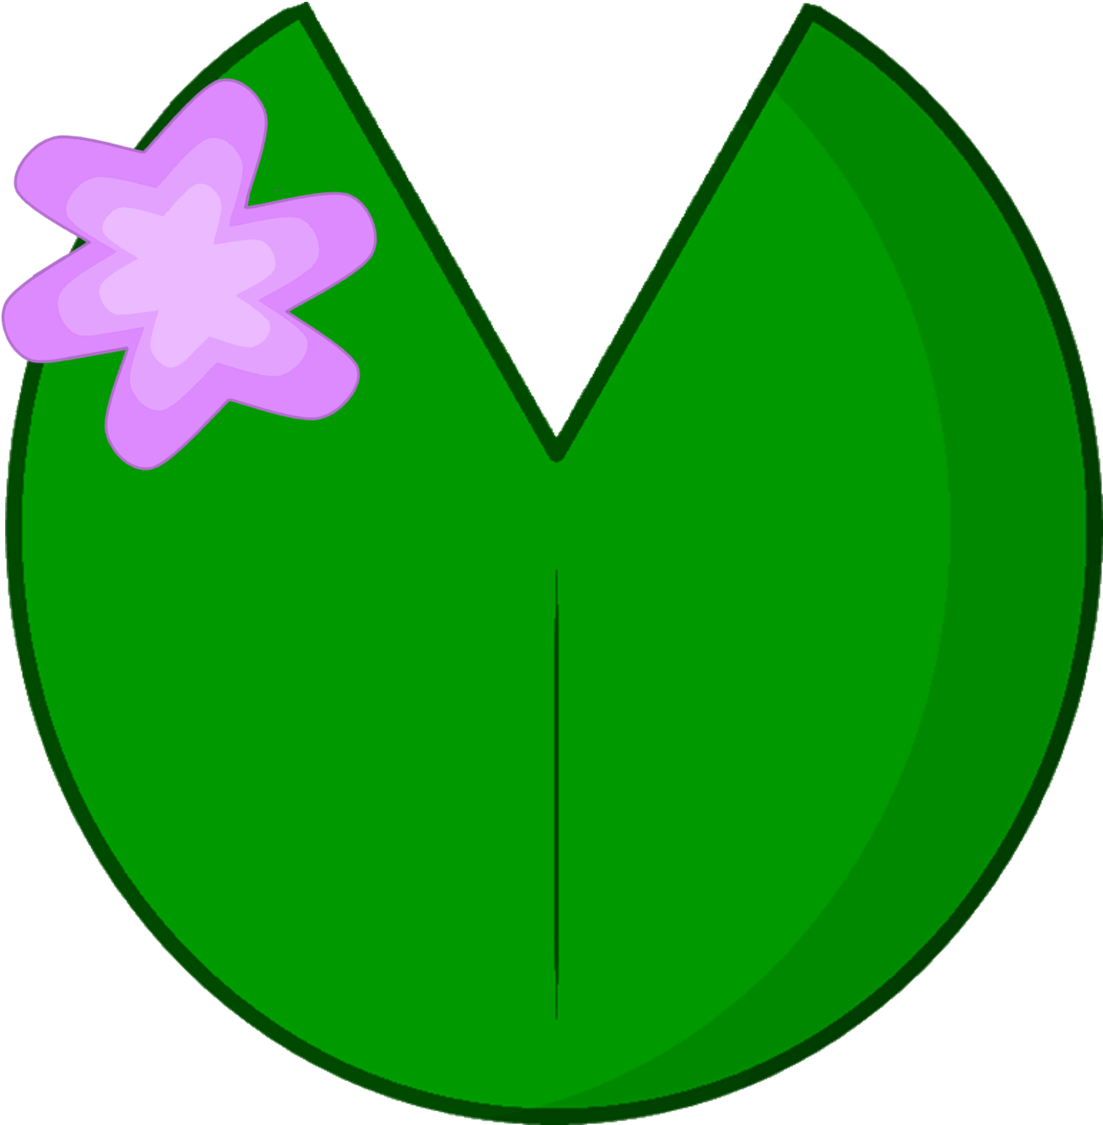 A Green Leaf With A Purple Flower